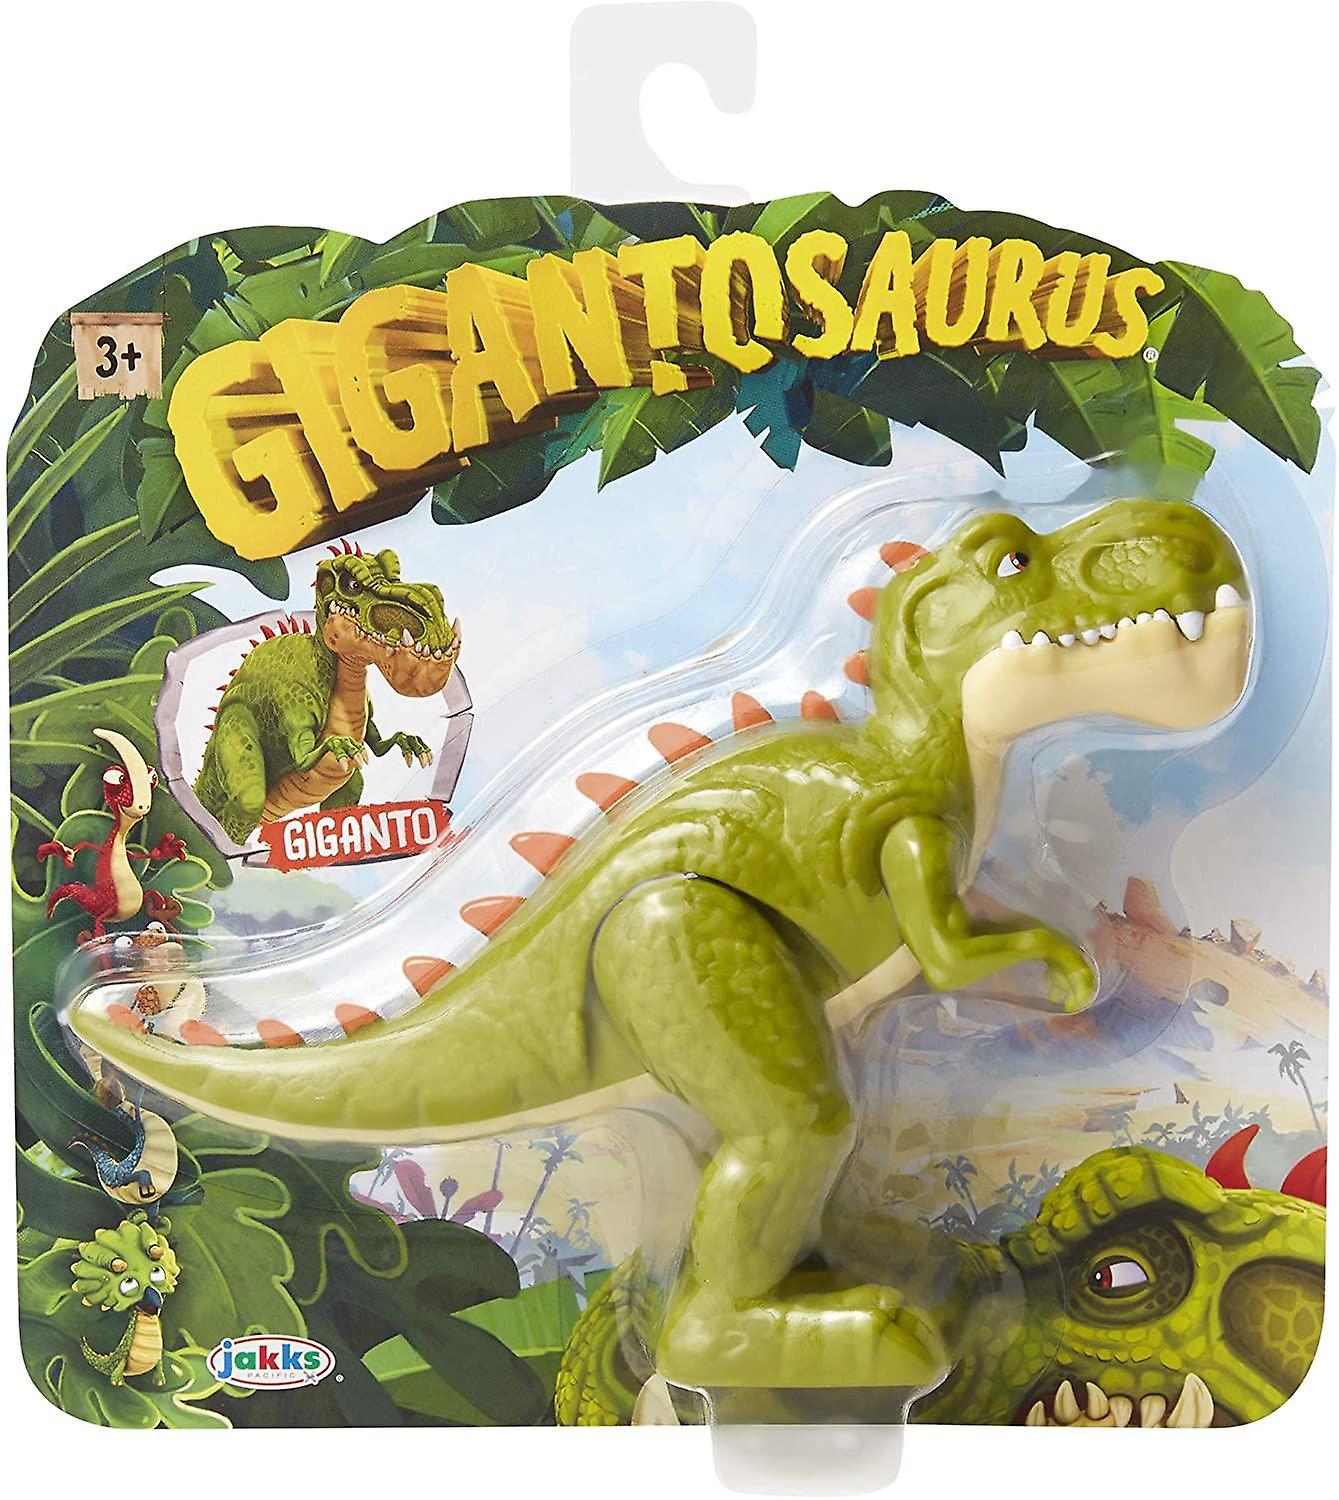 Gigantosaurus' Toy Line Launches in Italy